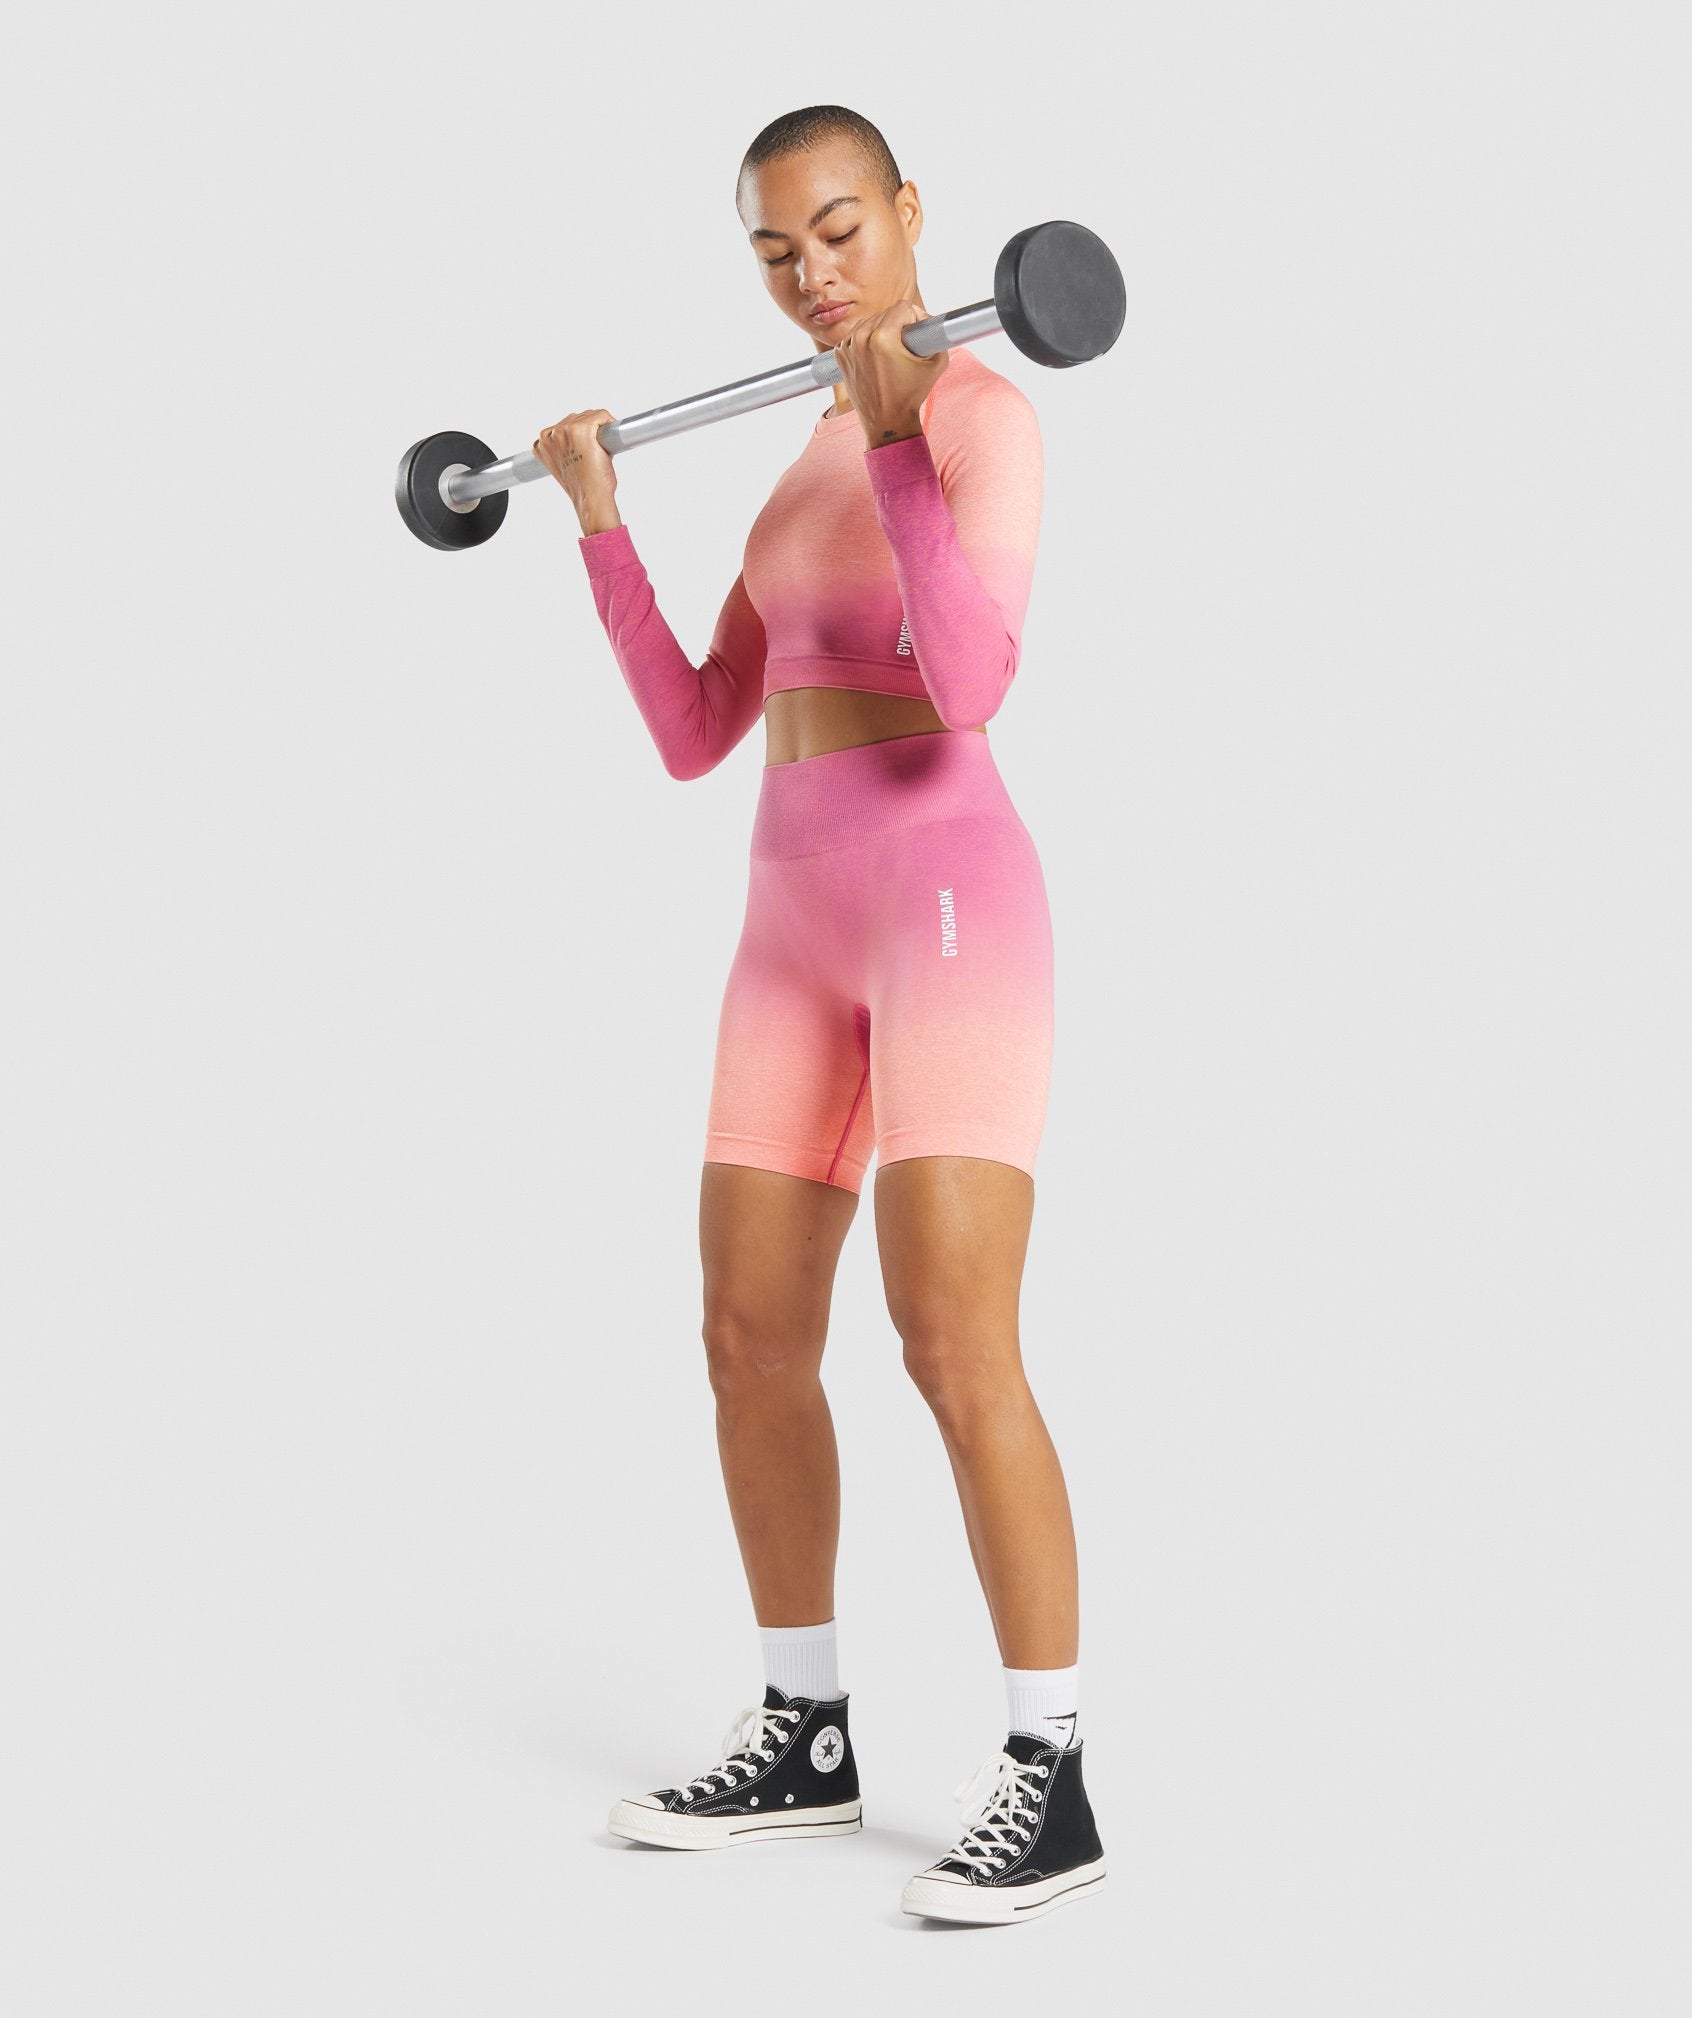 The Gymshark Ombre S  Fashion outfits, Workout attire, Fitness